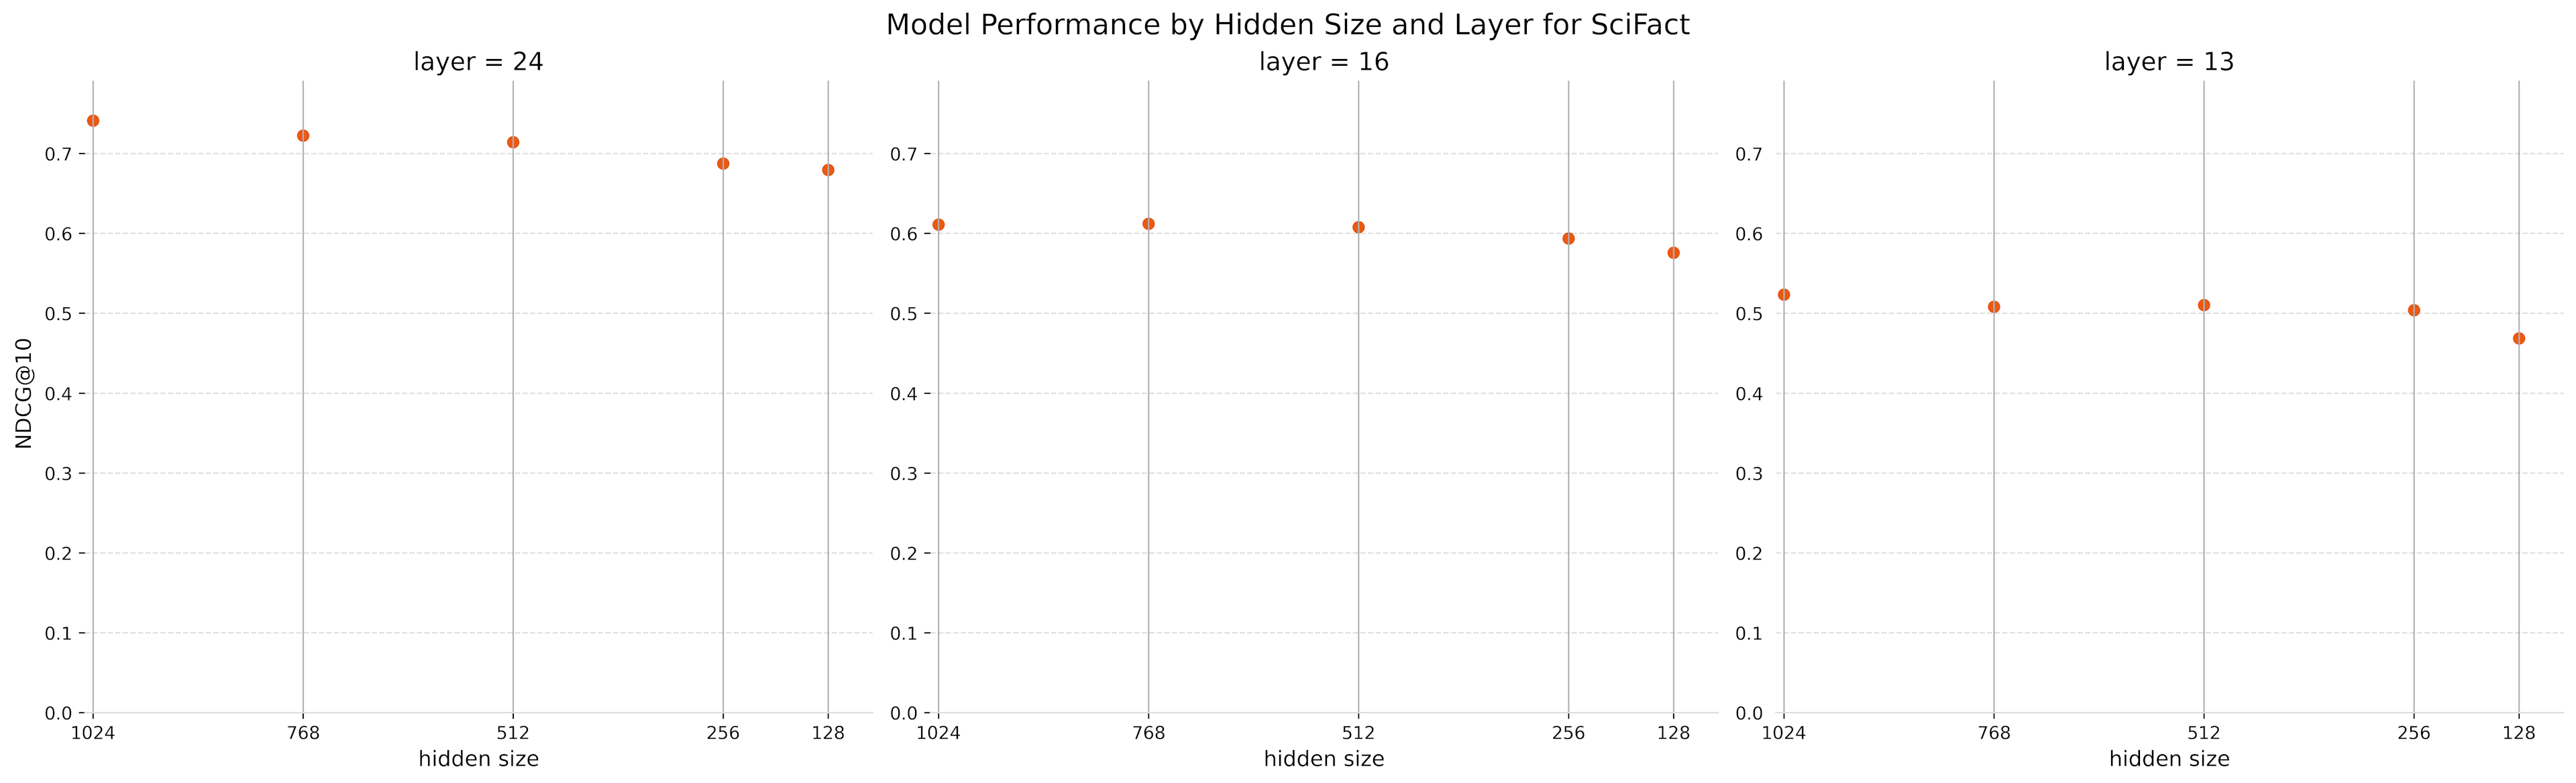 Model performance for 24, 16, and 13 layers and different embeddings sizes against the SciFact benchmark